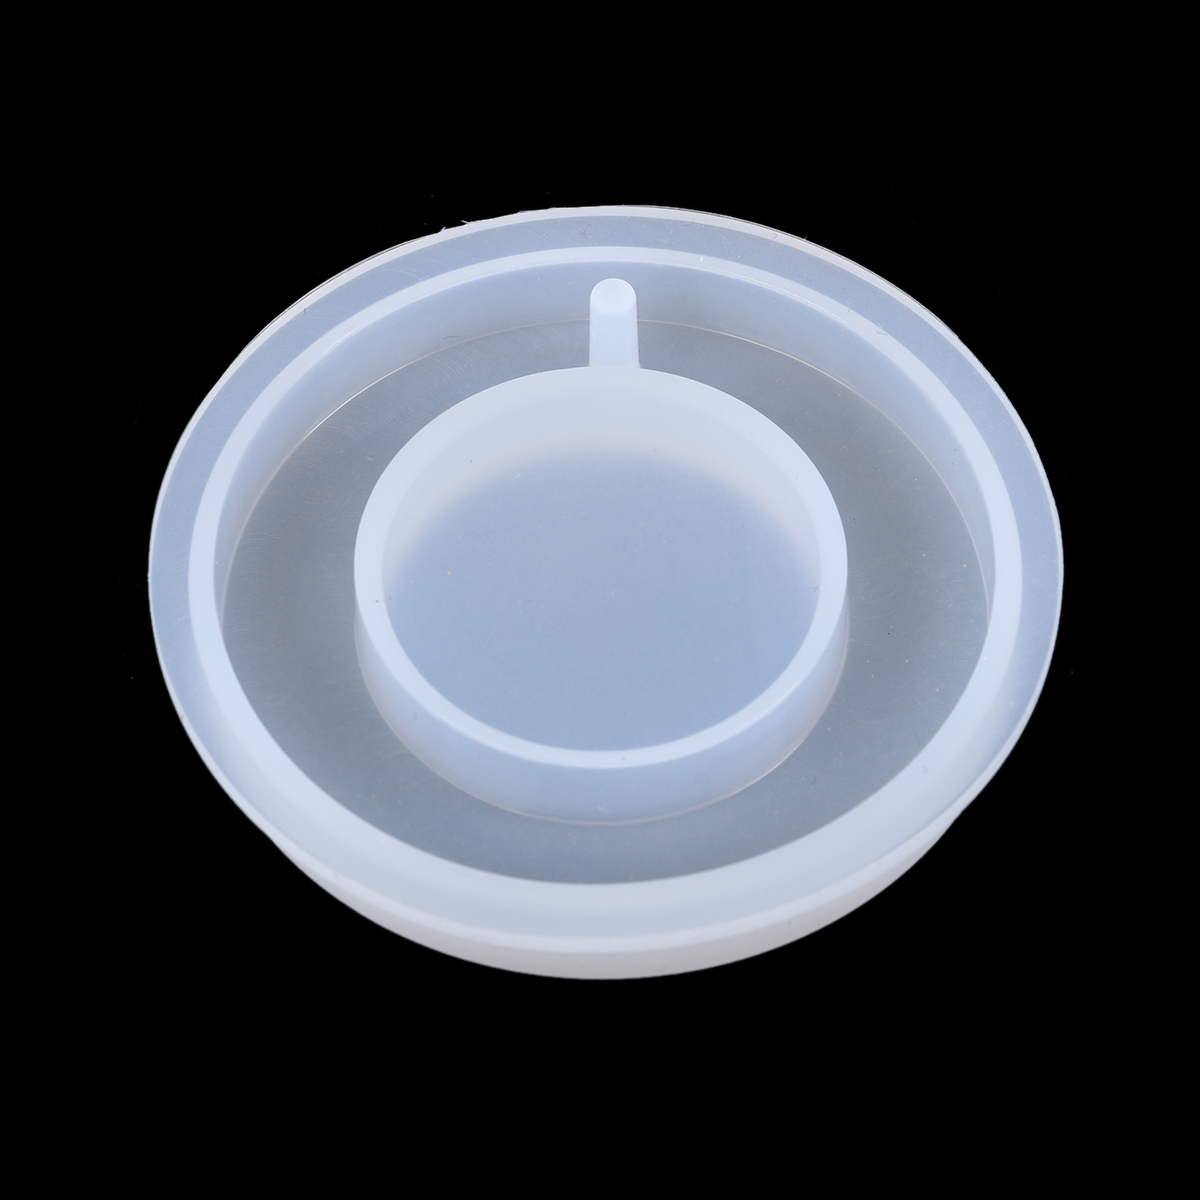 Picture of Silicone Resin Mold For Jewelry Making Round White 7cm(2 6/8") Dia., 1 Piece